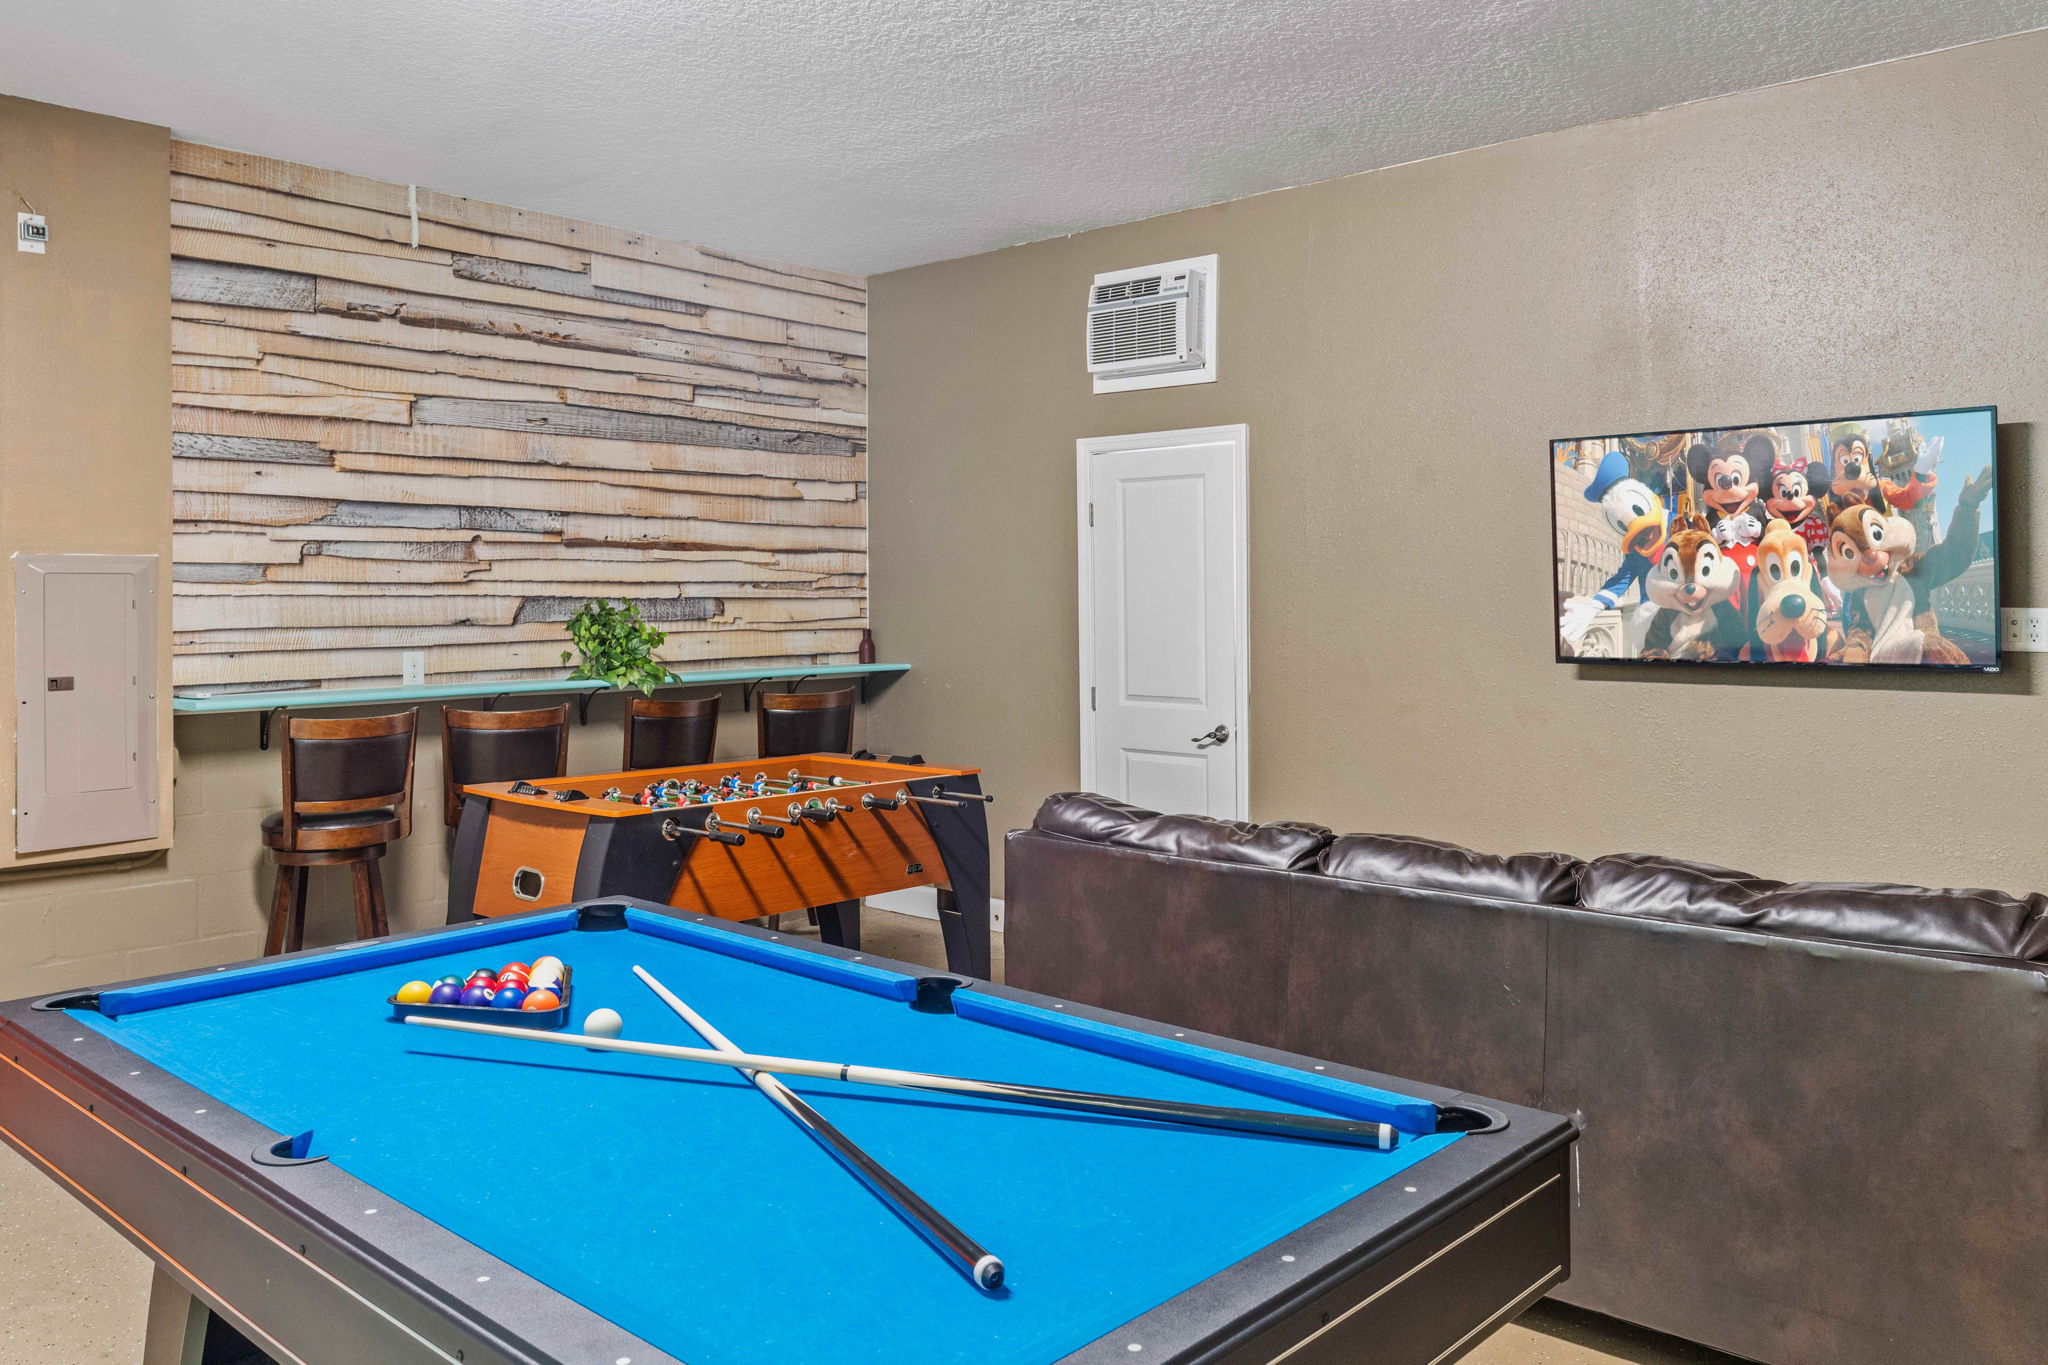 The game room at Vista Cay Resort features a classic pool table, inviting guests to enjoy friendly competition and leisurely fun in a vibrant and engaging atmosphere, creating memorable moments for all to cherish.